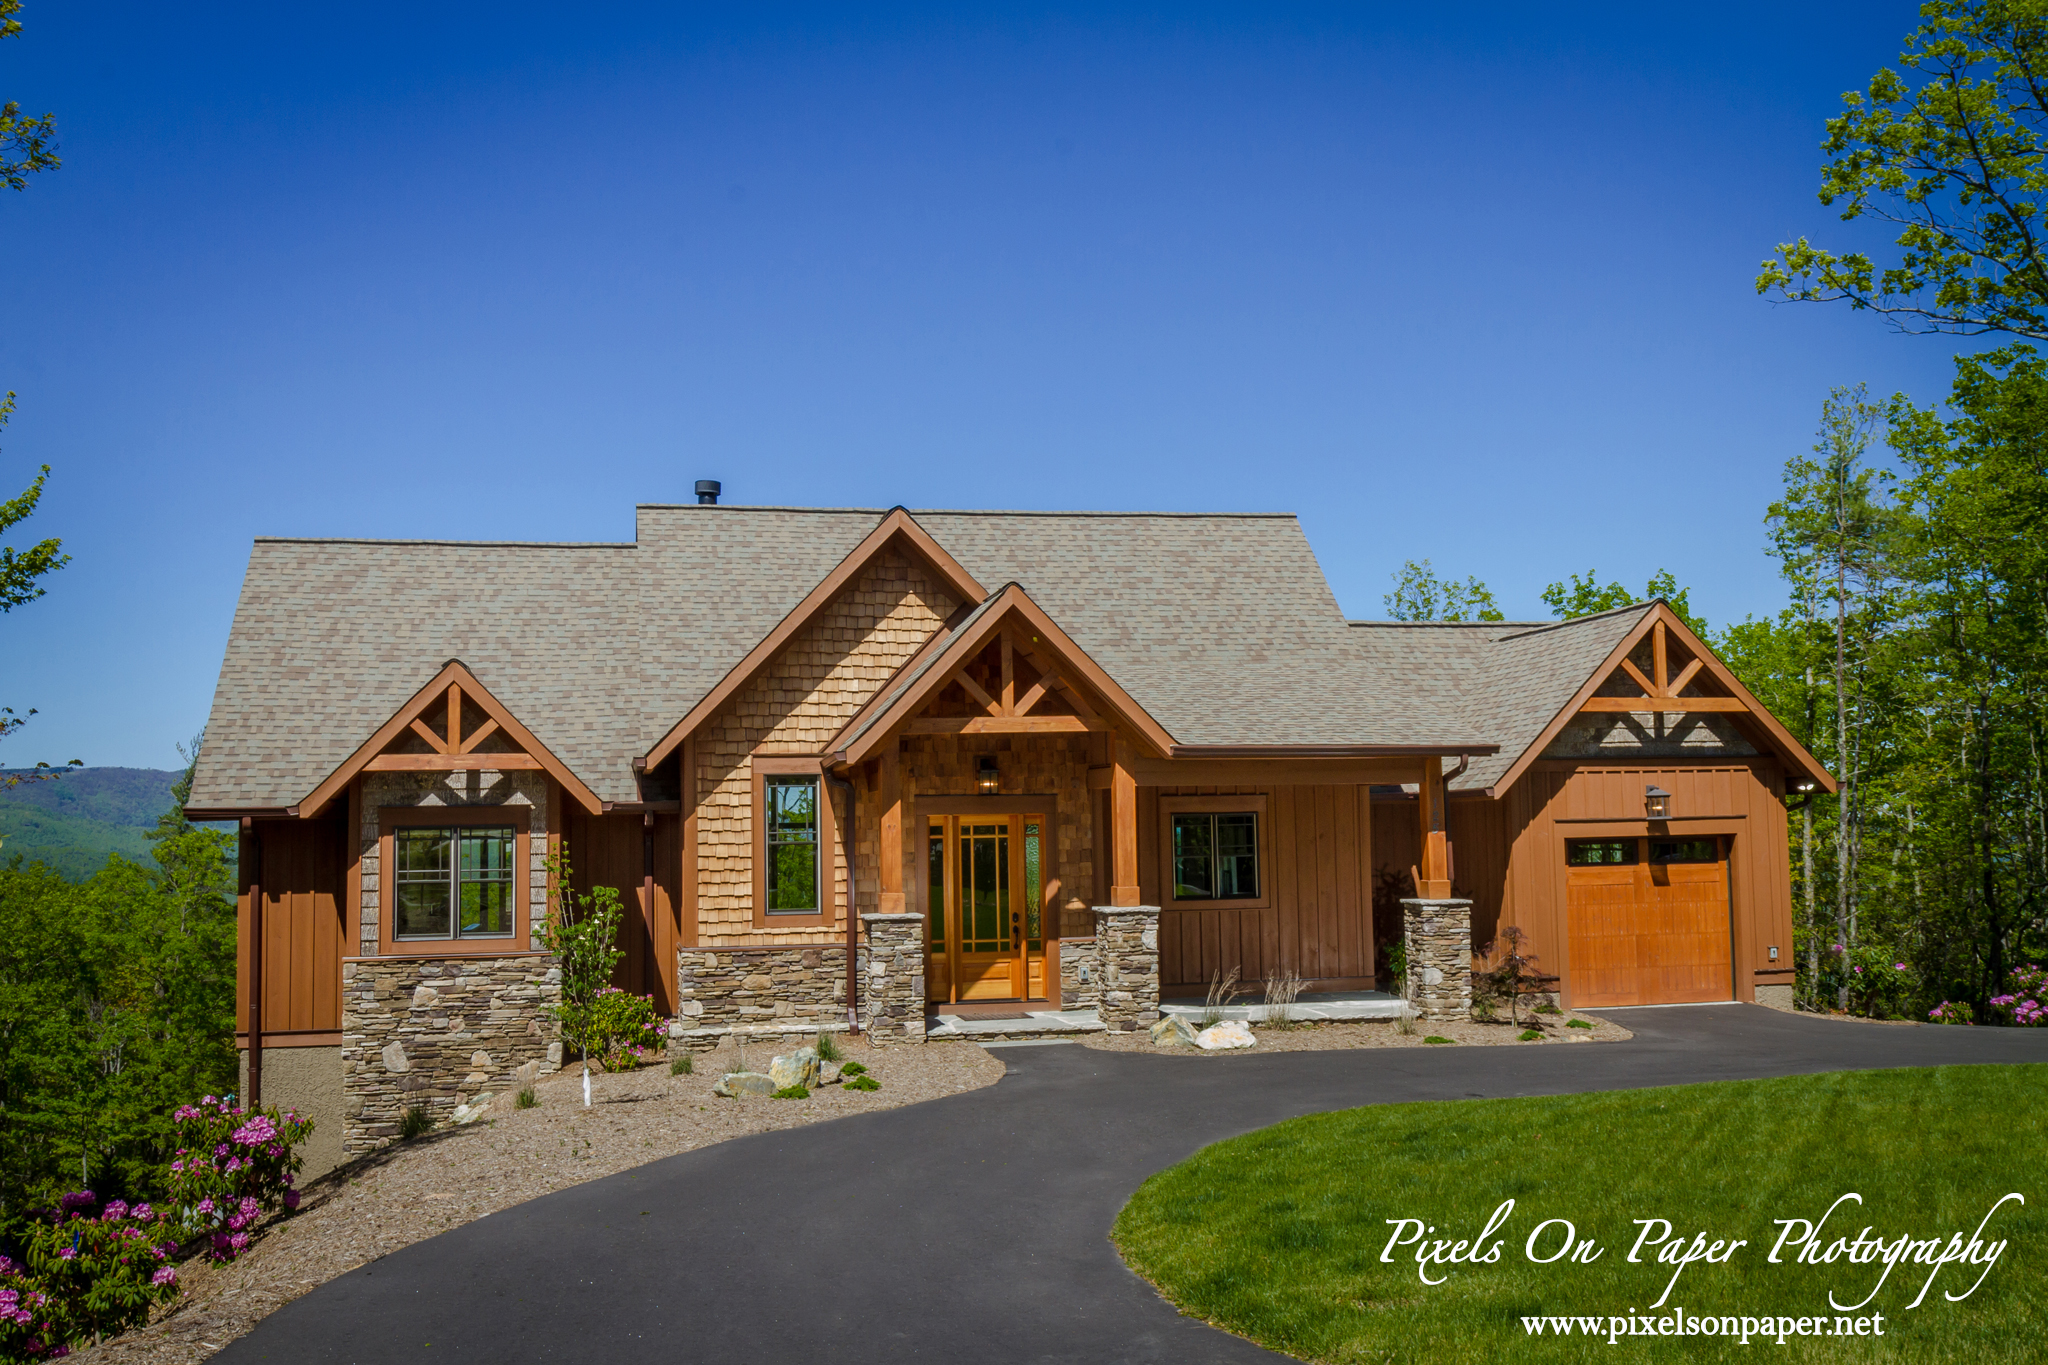 MBI Builders custom home blue ridge mountain club architectural photography pixels on paper commercial photographers photo